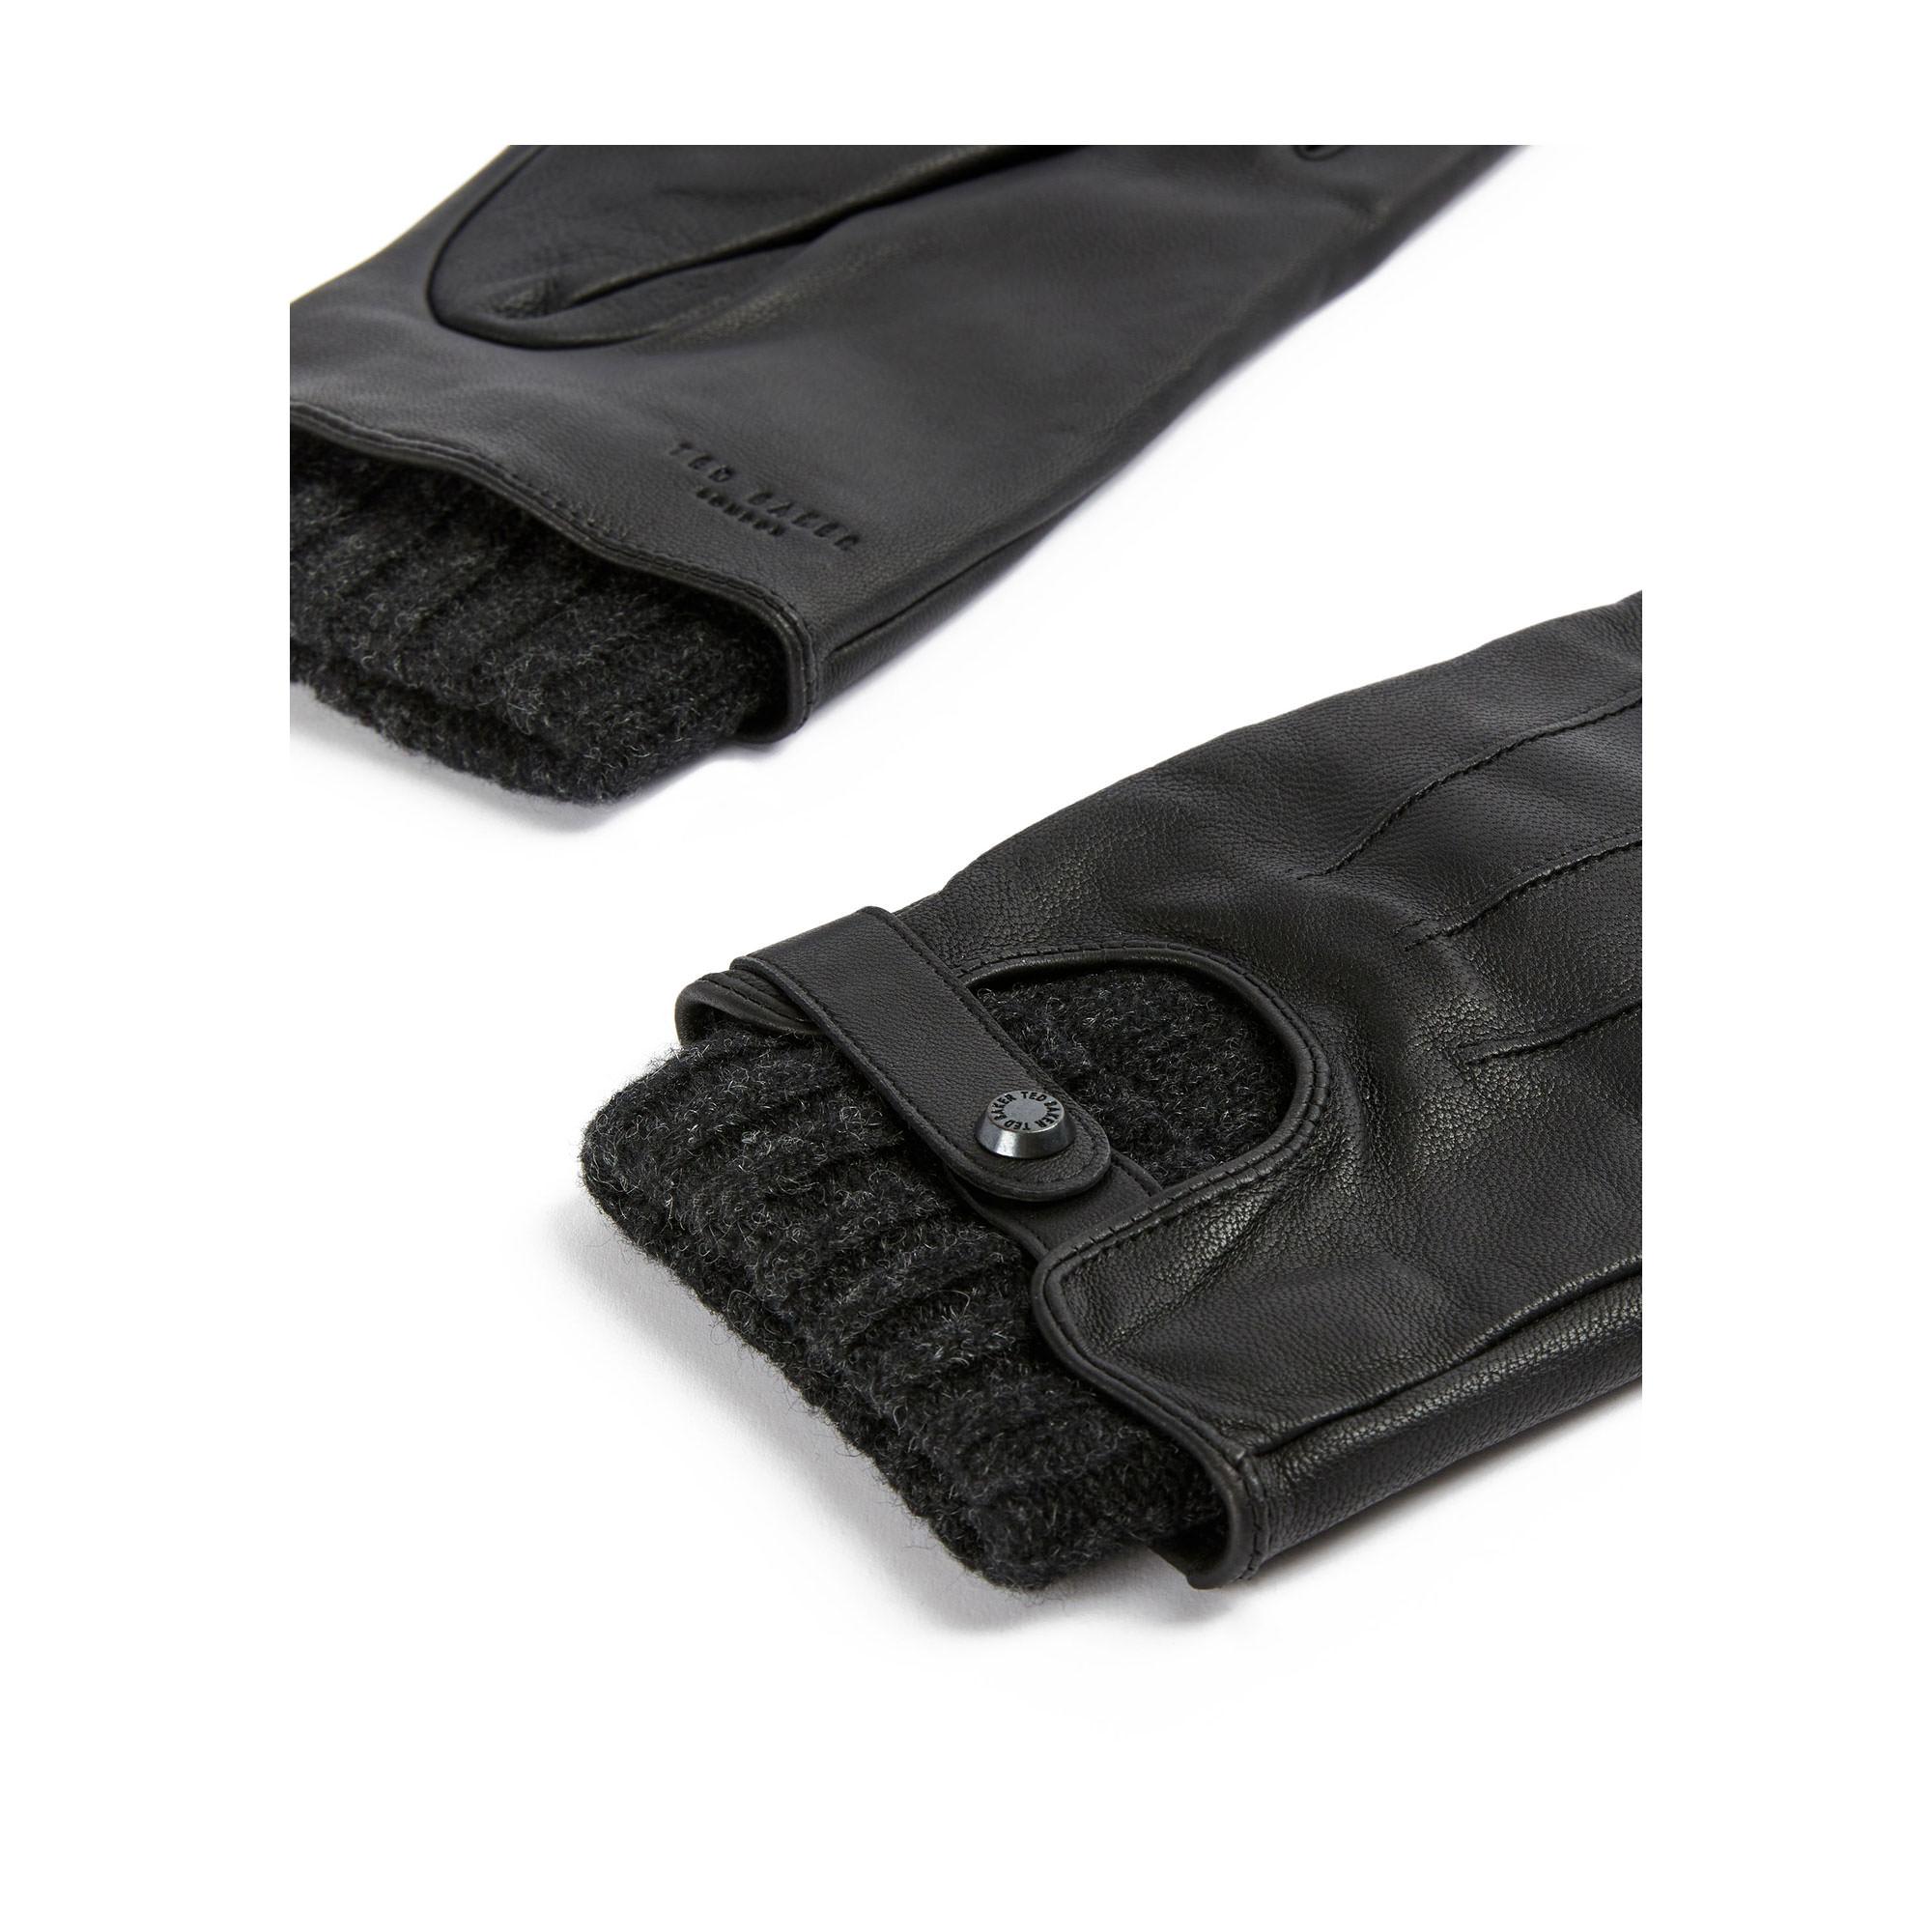 Satch Leather Knitted Gloves